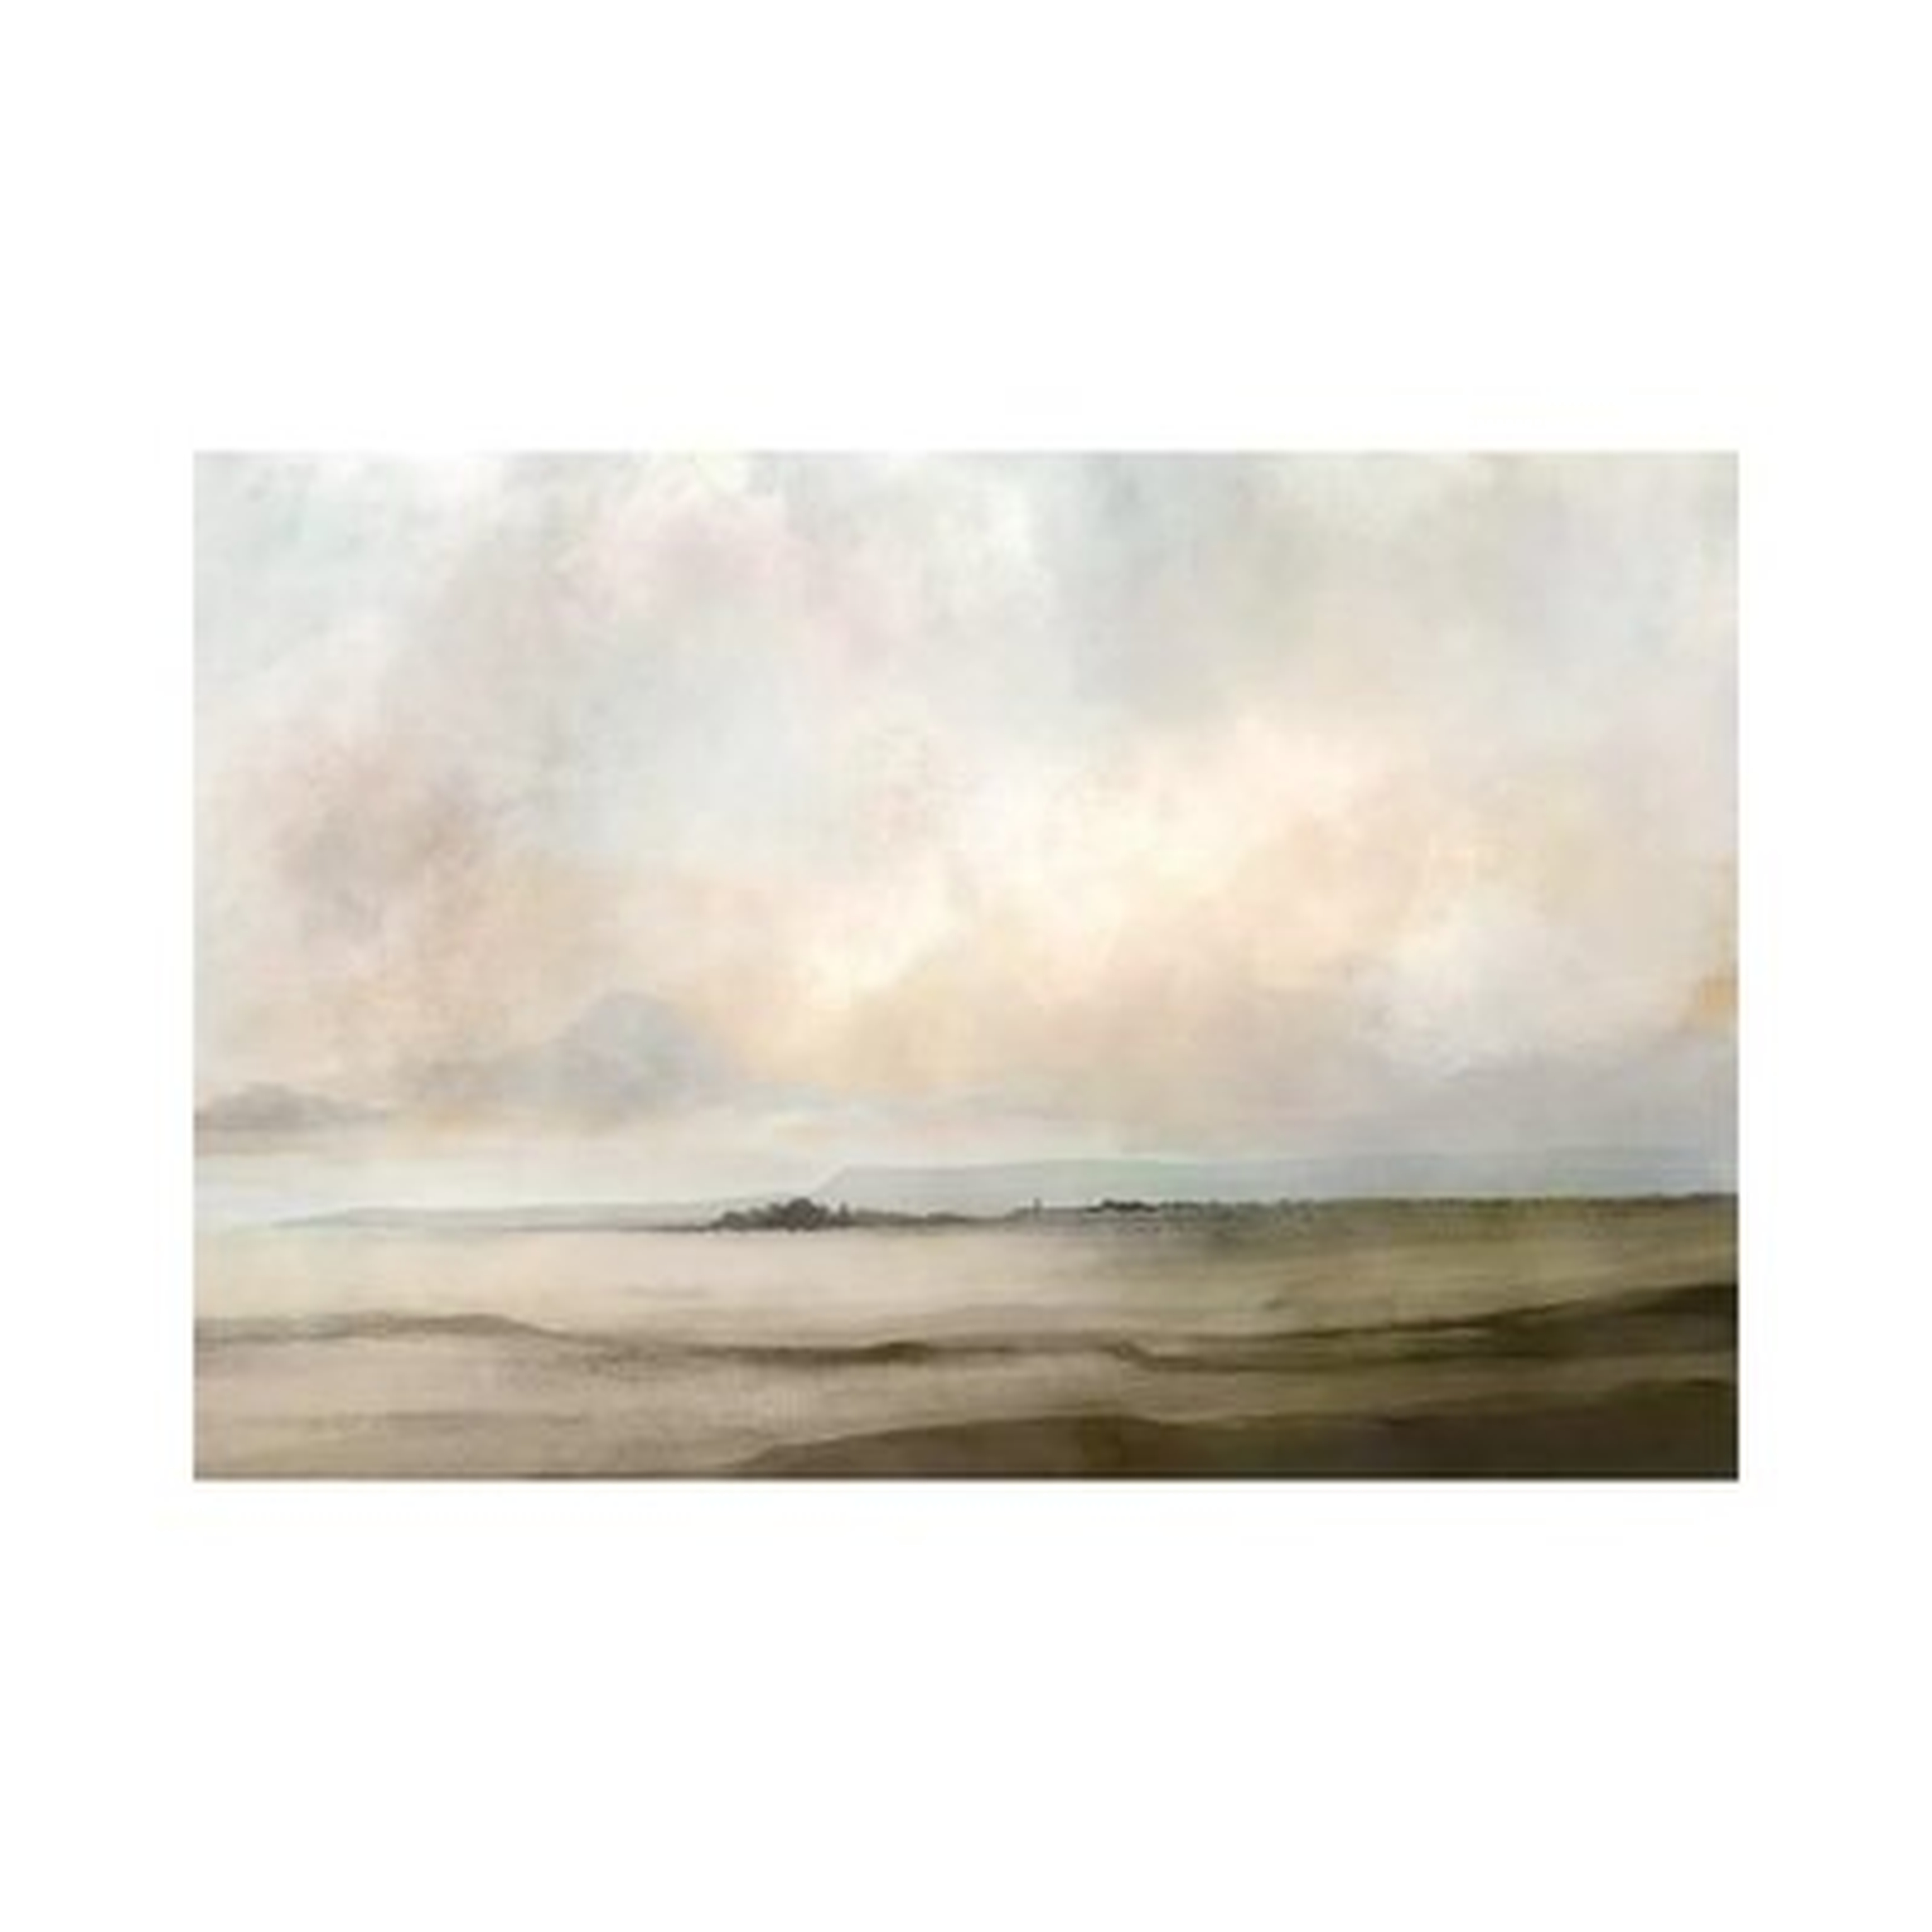 Topsham by Dan Hobday - Wrapped Canvas Painting Print - Wayfair